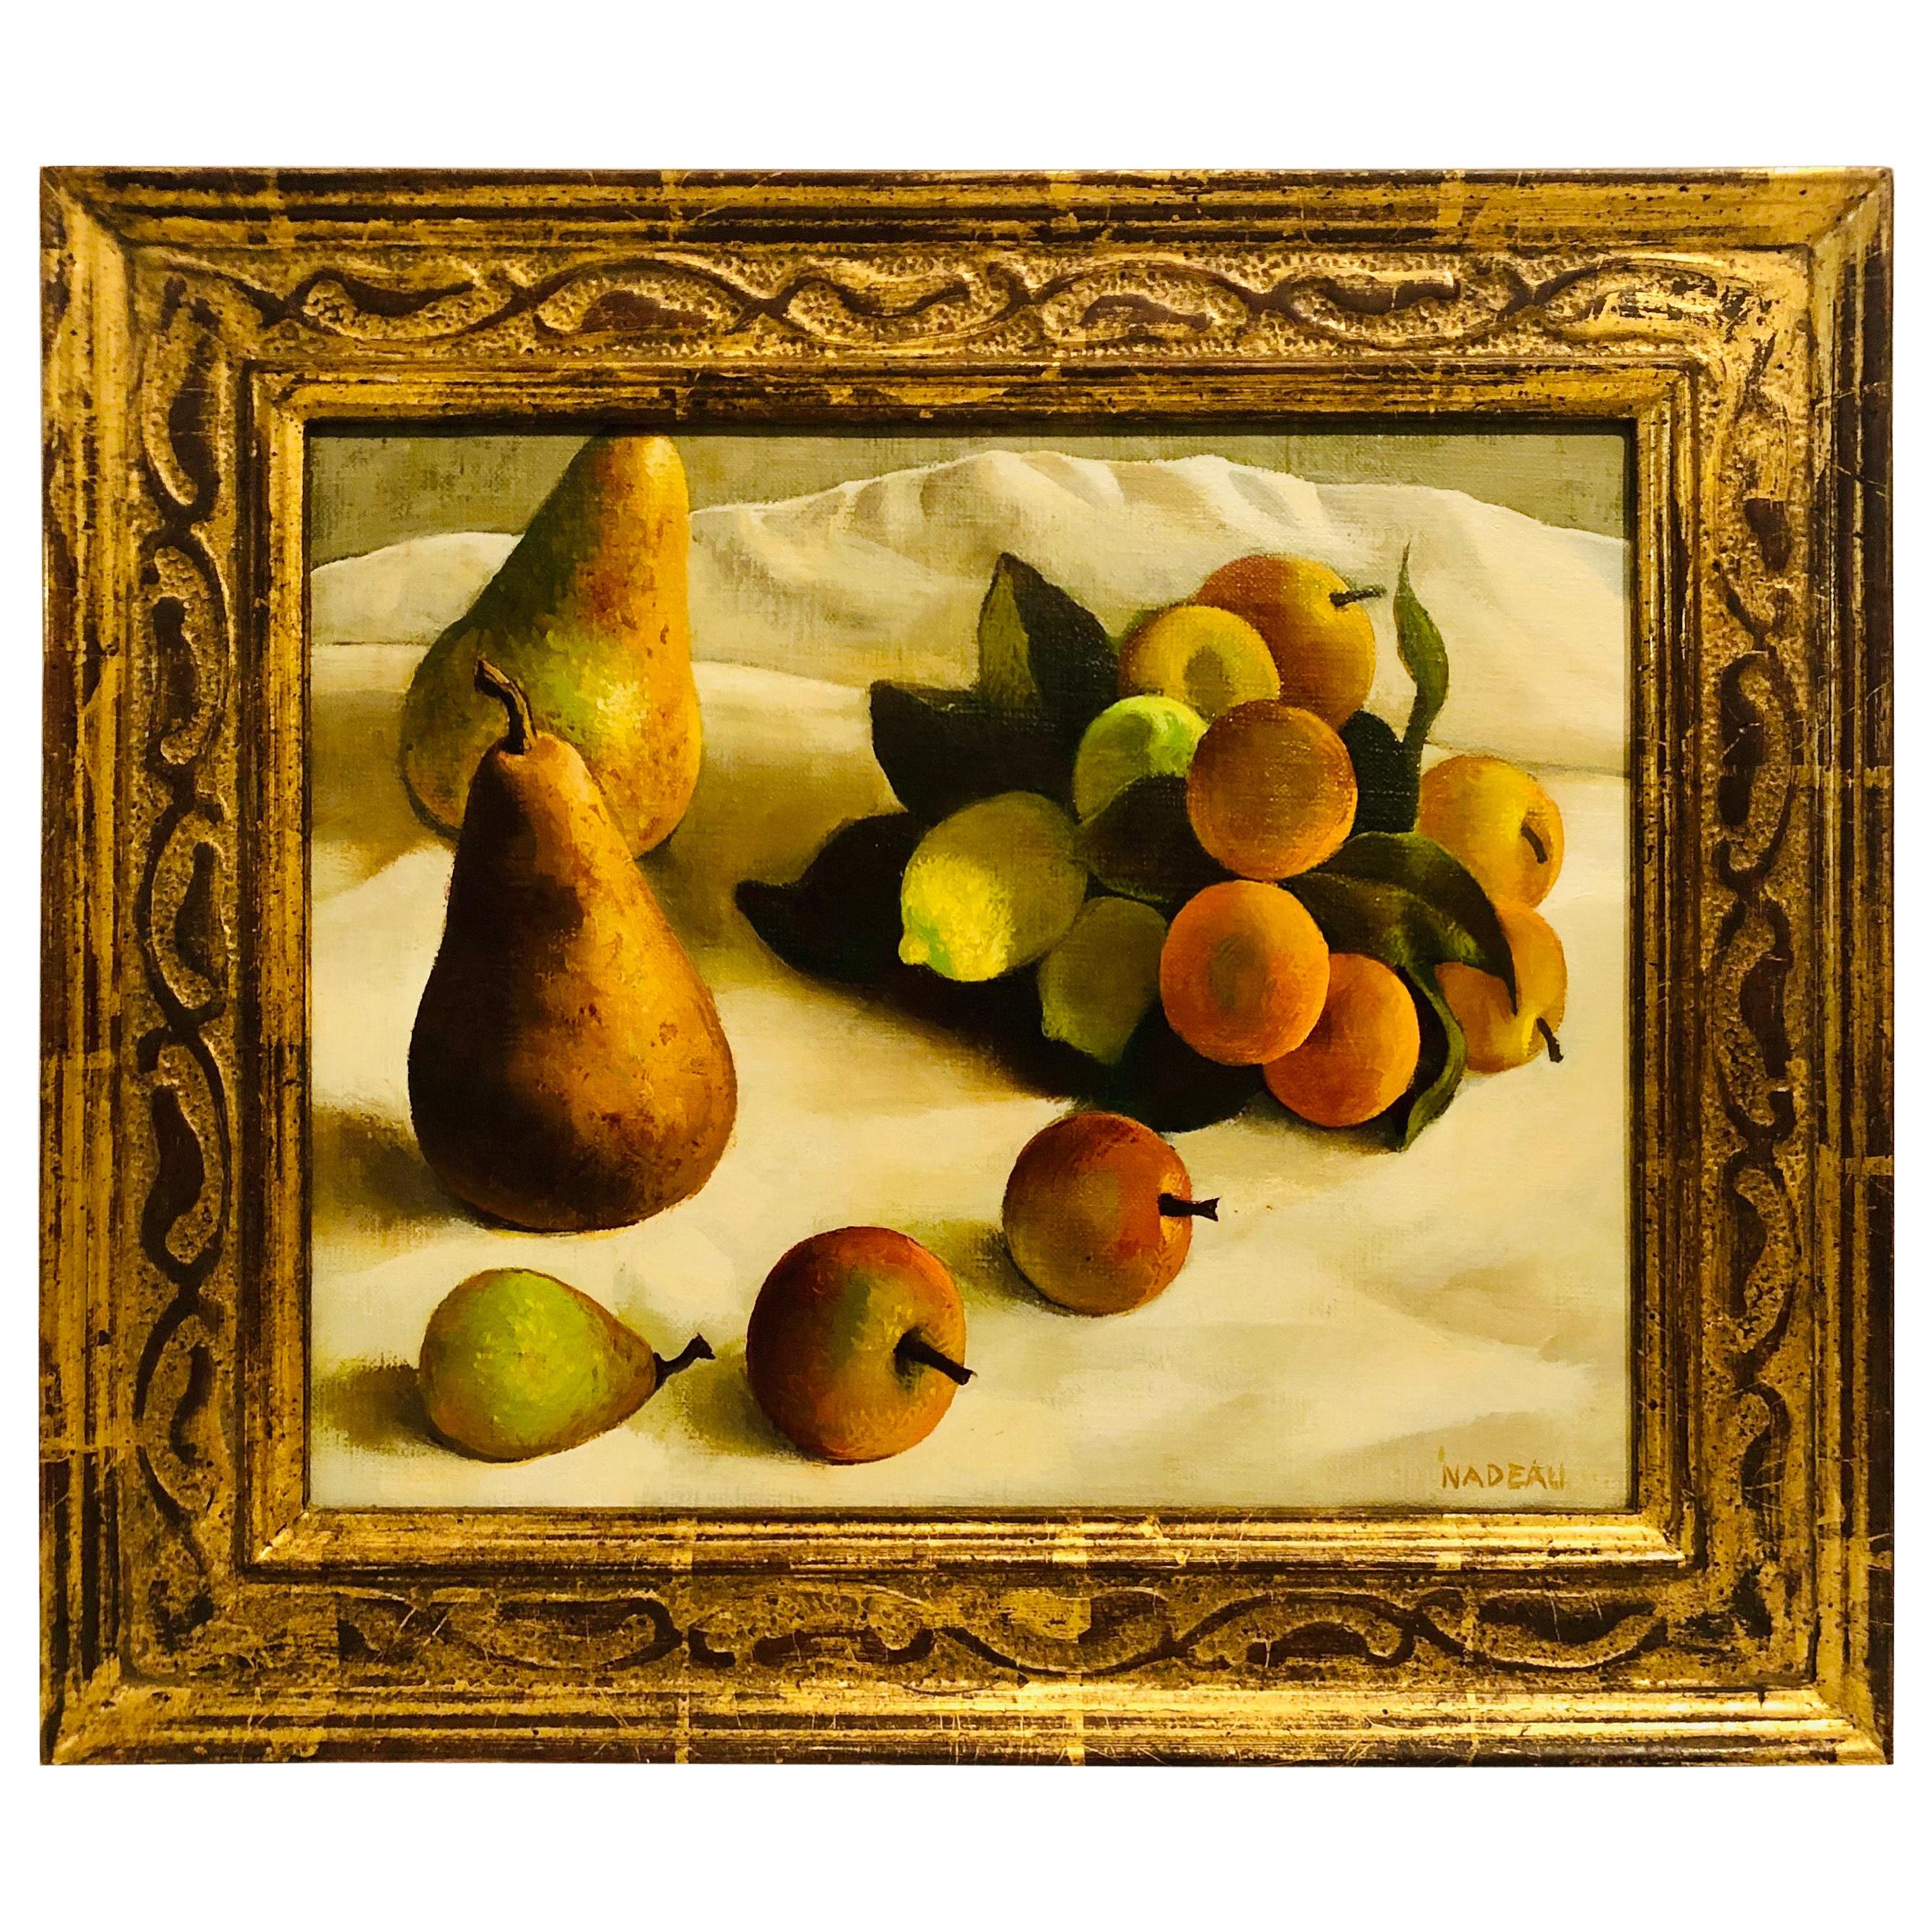 Oil on Canvas Painting of Pears and Other Fruits in a Gold Frame Signed Nadeau